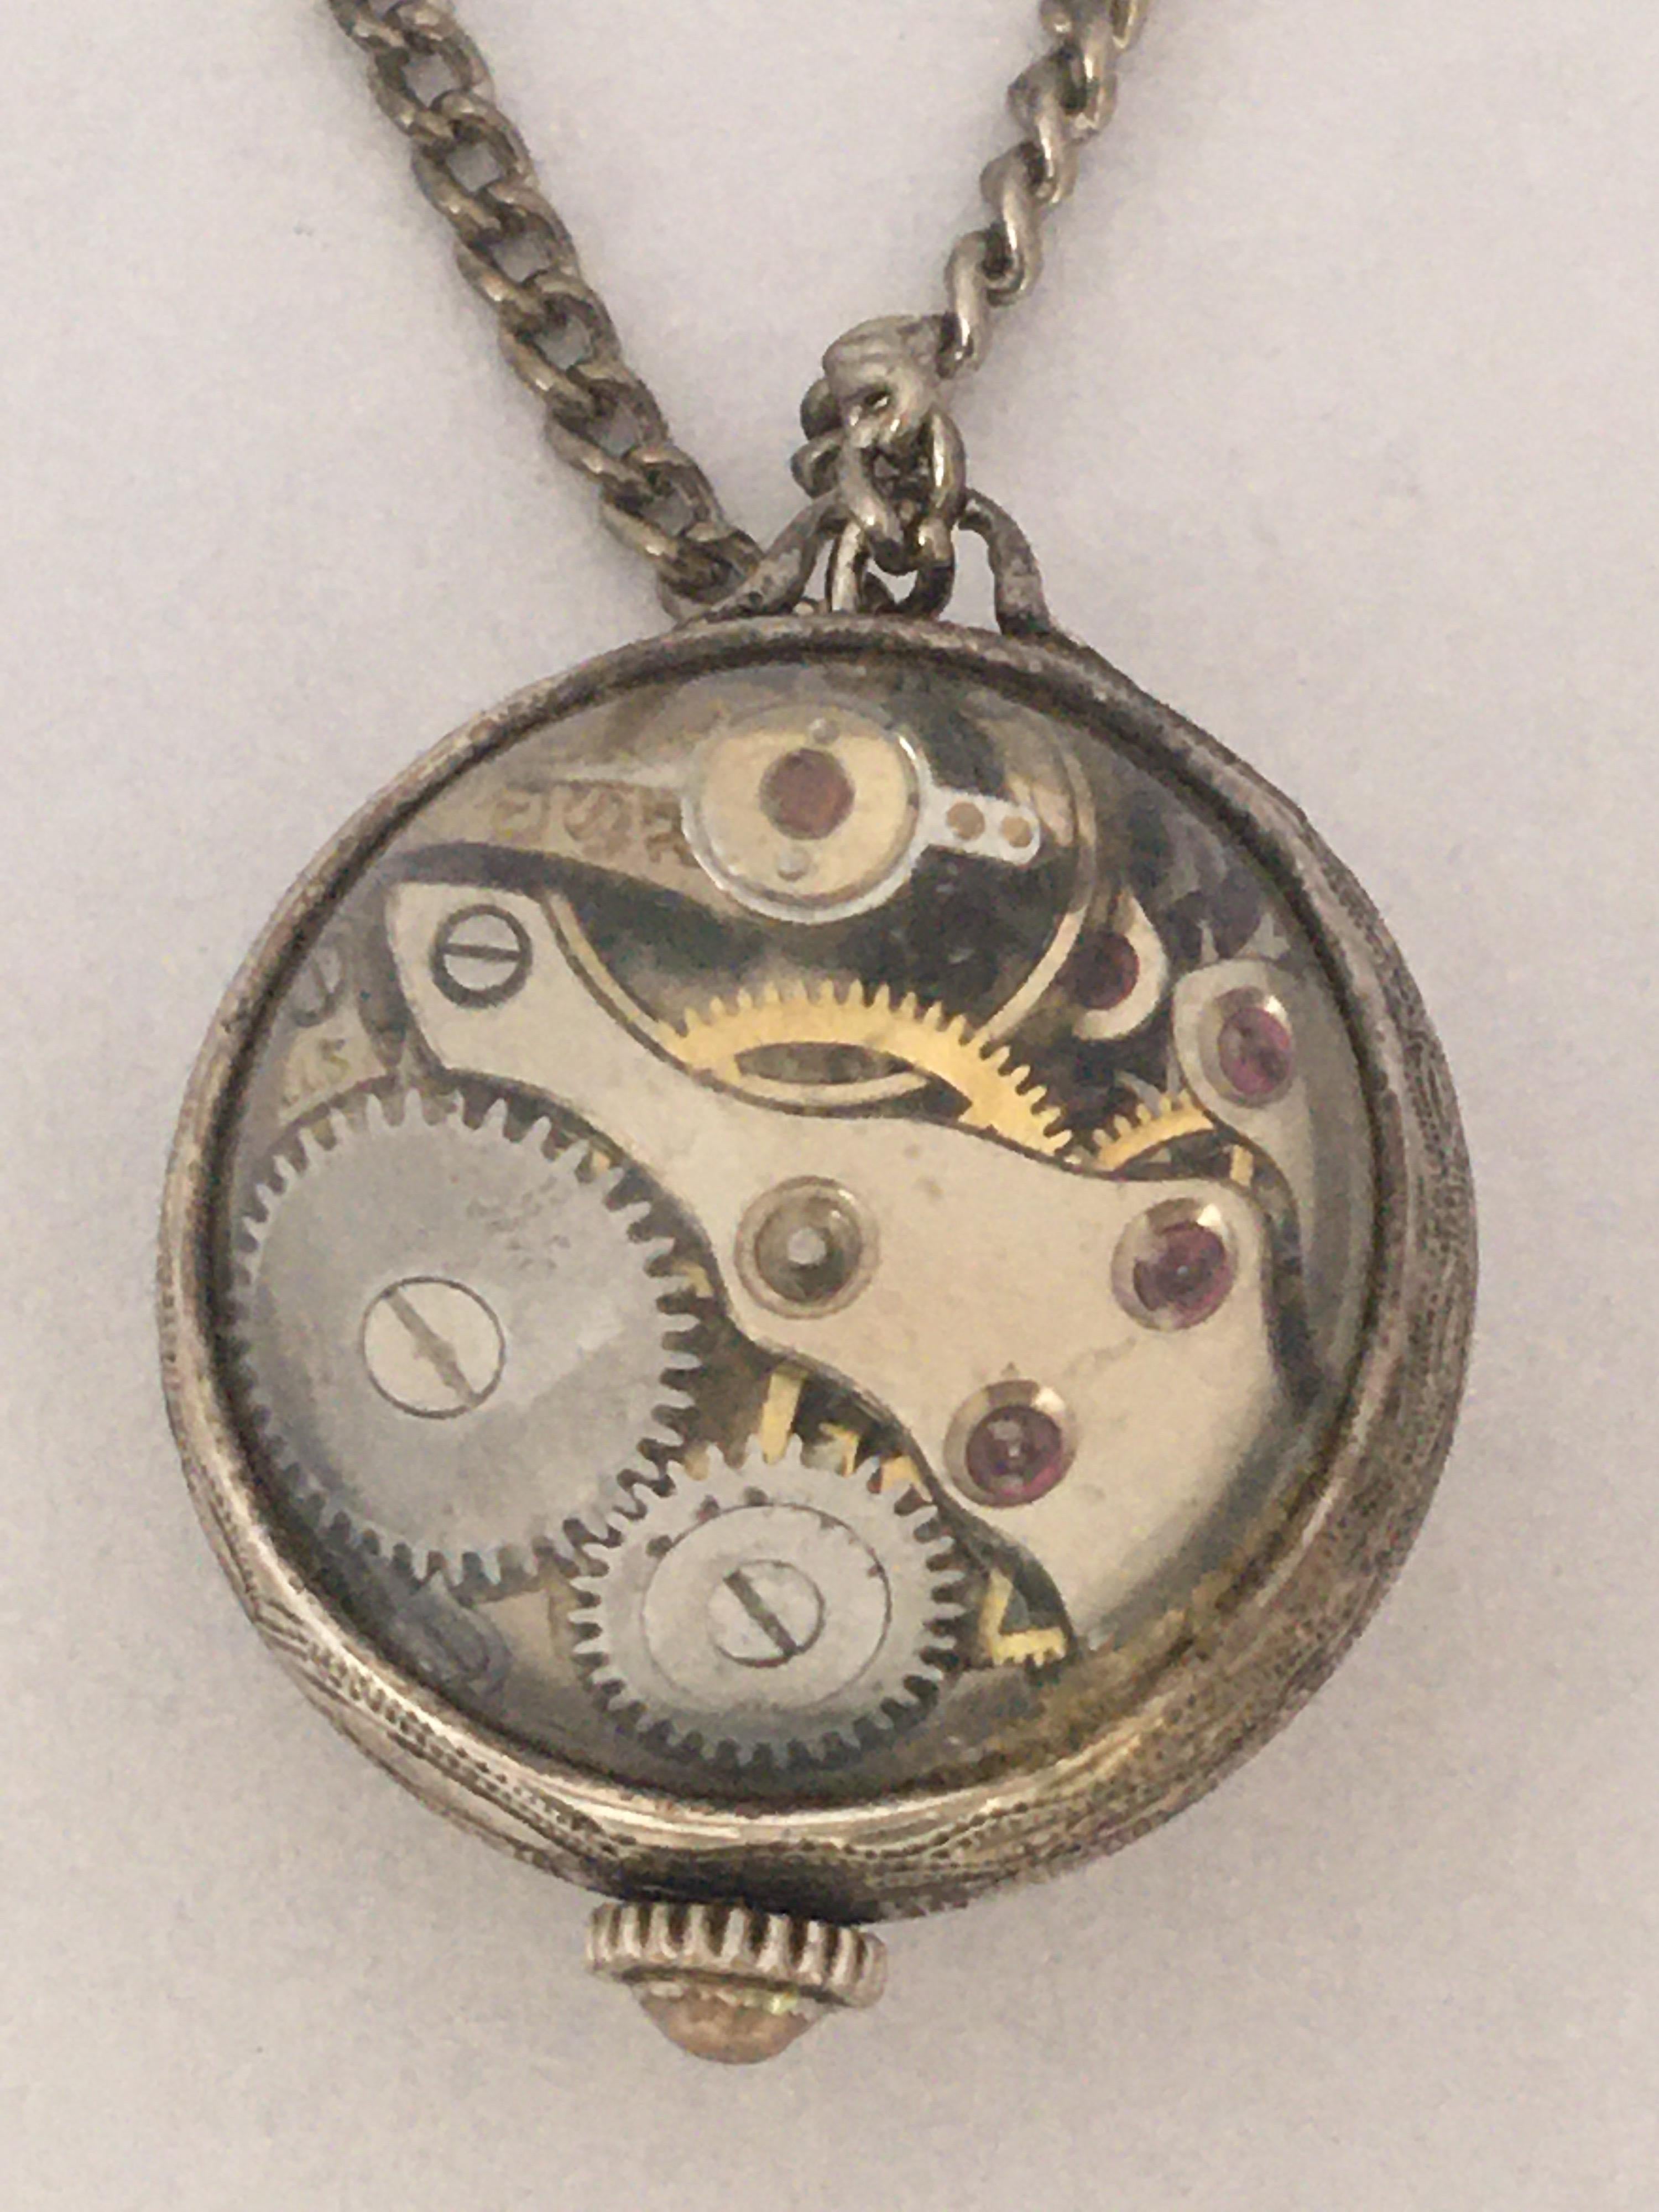 This small and beautiful vintage hand winding fob / pendant ball watch is in good working condition and it is running well. It is recently been serviced. Minor signs of ageing and wear with small and light scratches on the glass as shown. 

Please